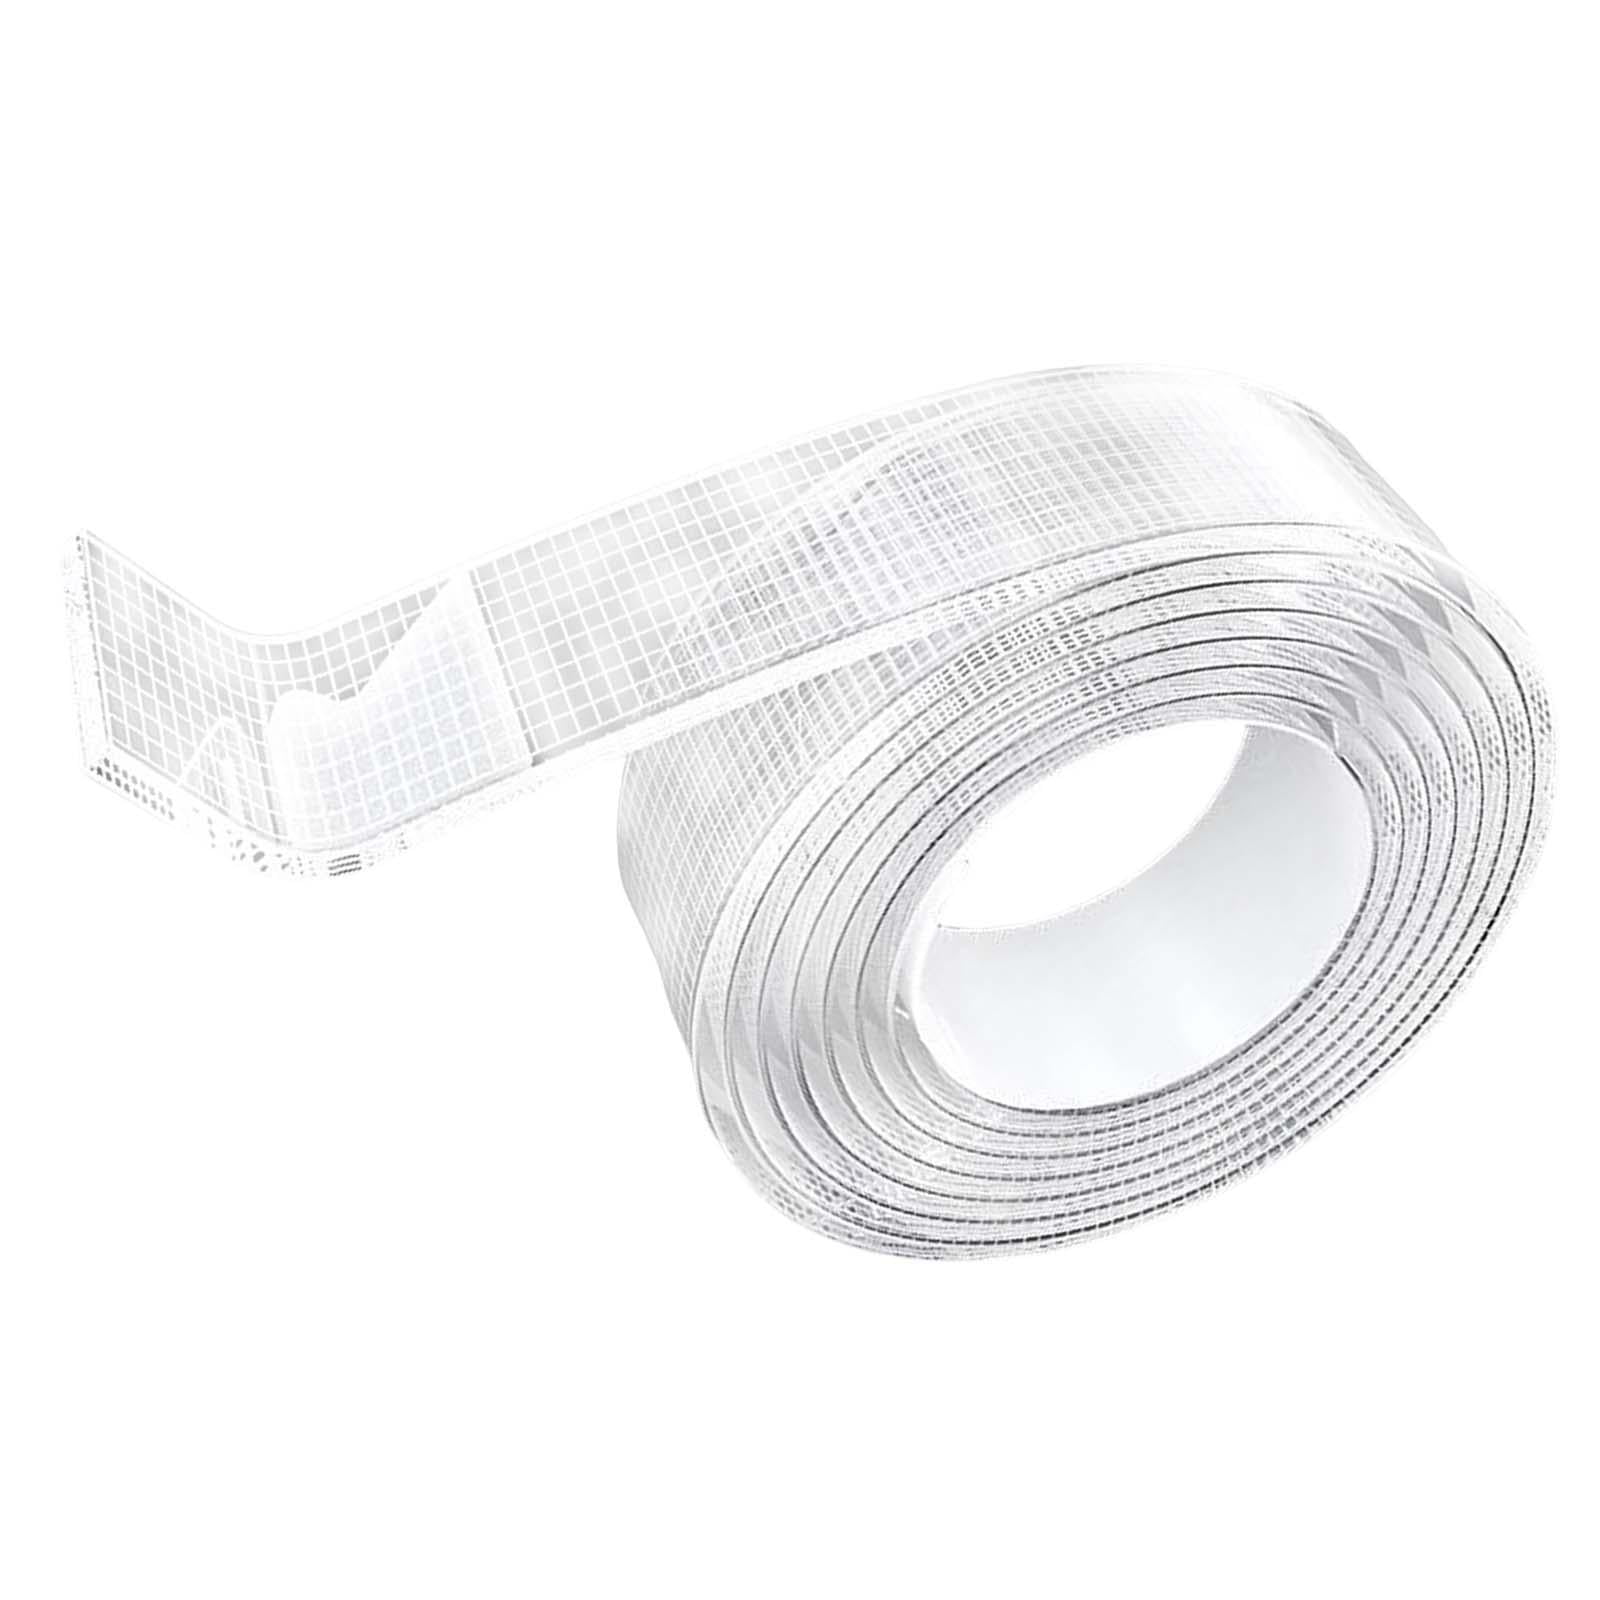 Coipdfty Double Sided Tape for Walls Removable Poster Tape Mount Tape Heavy Duty Sticky Tape for Wall Hanging Pictures Traceless Washable Adhesive